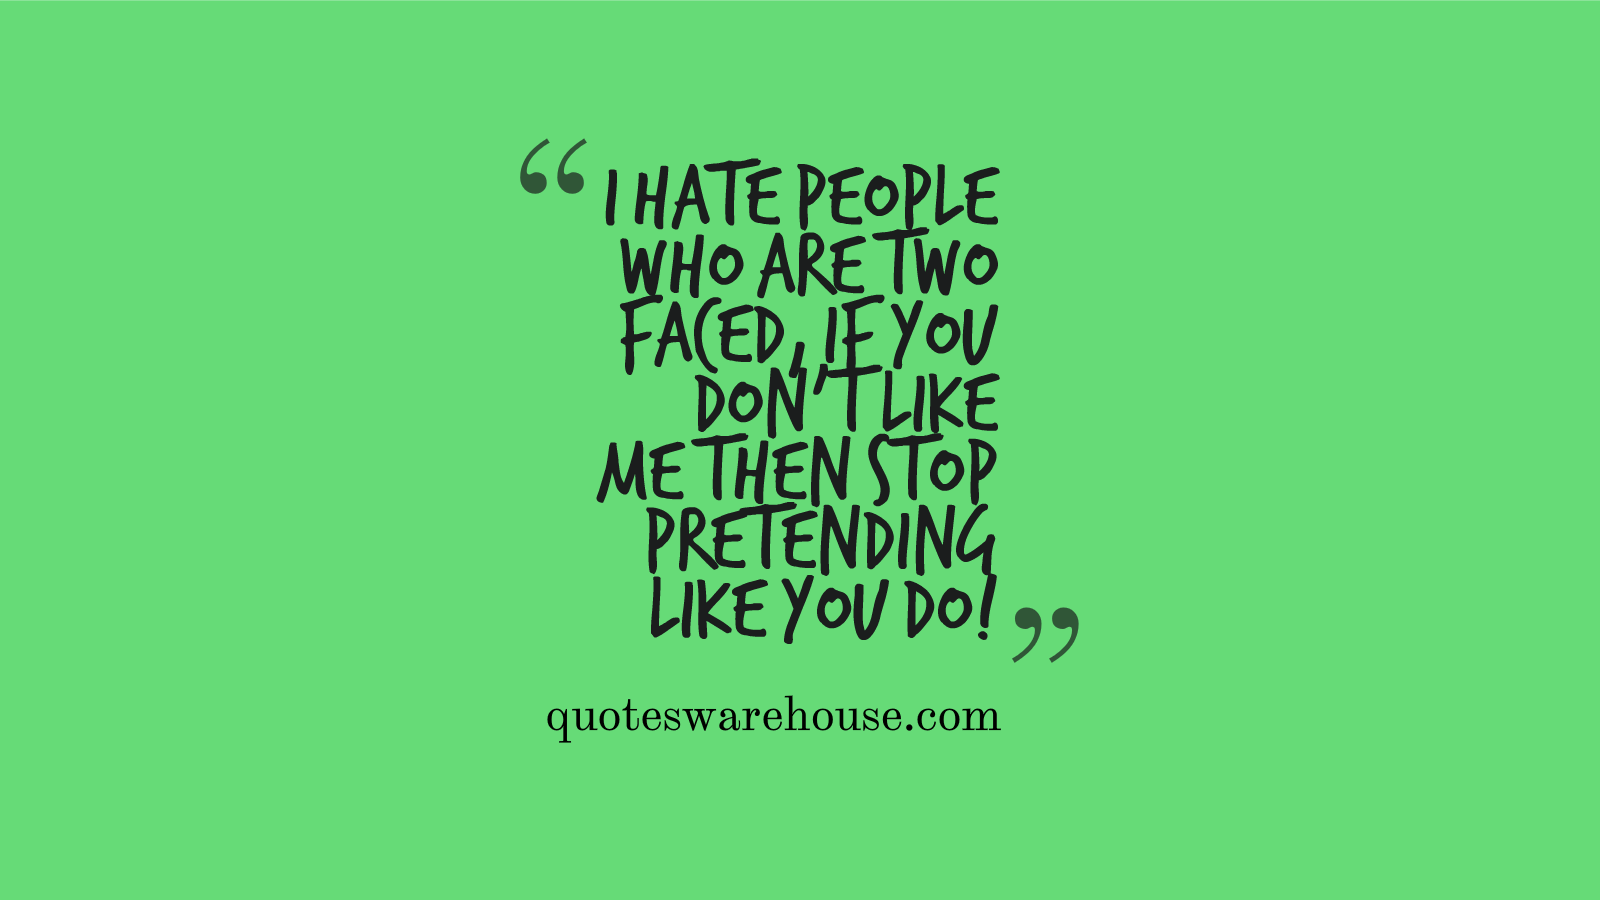 Fake People Quotes For Facebook. QuotesGram